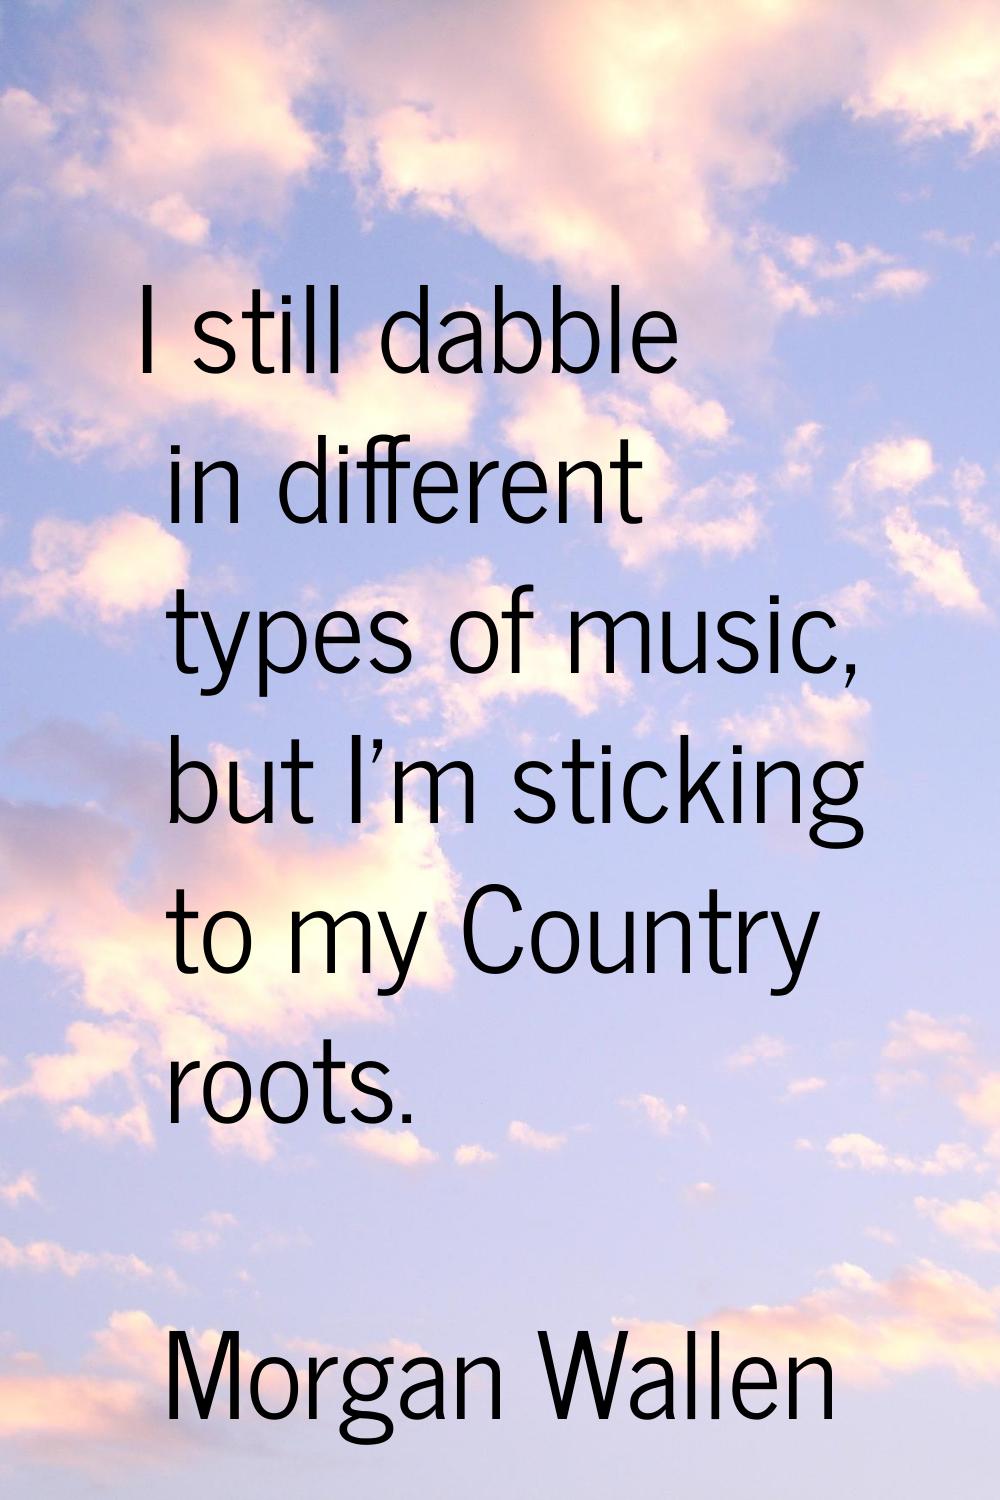 I still dabble in different types of music, but I'm sticking to my Country roots.